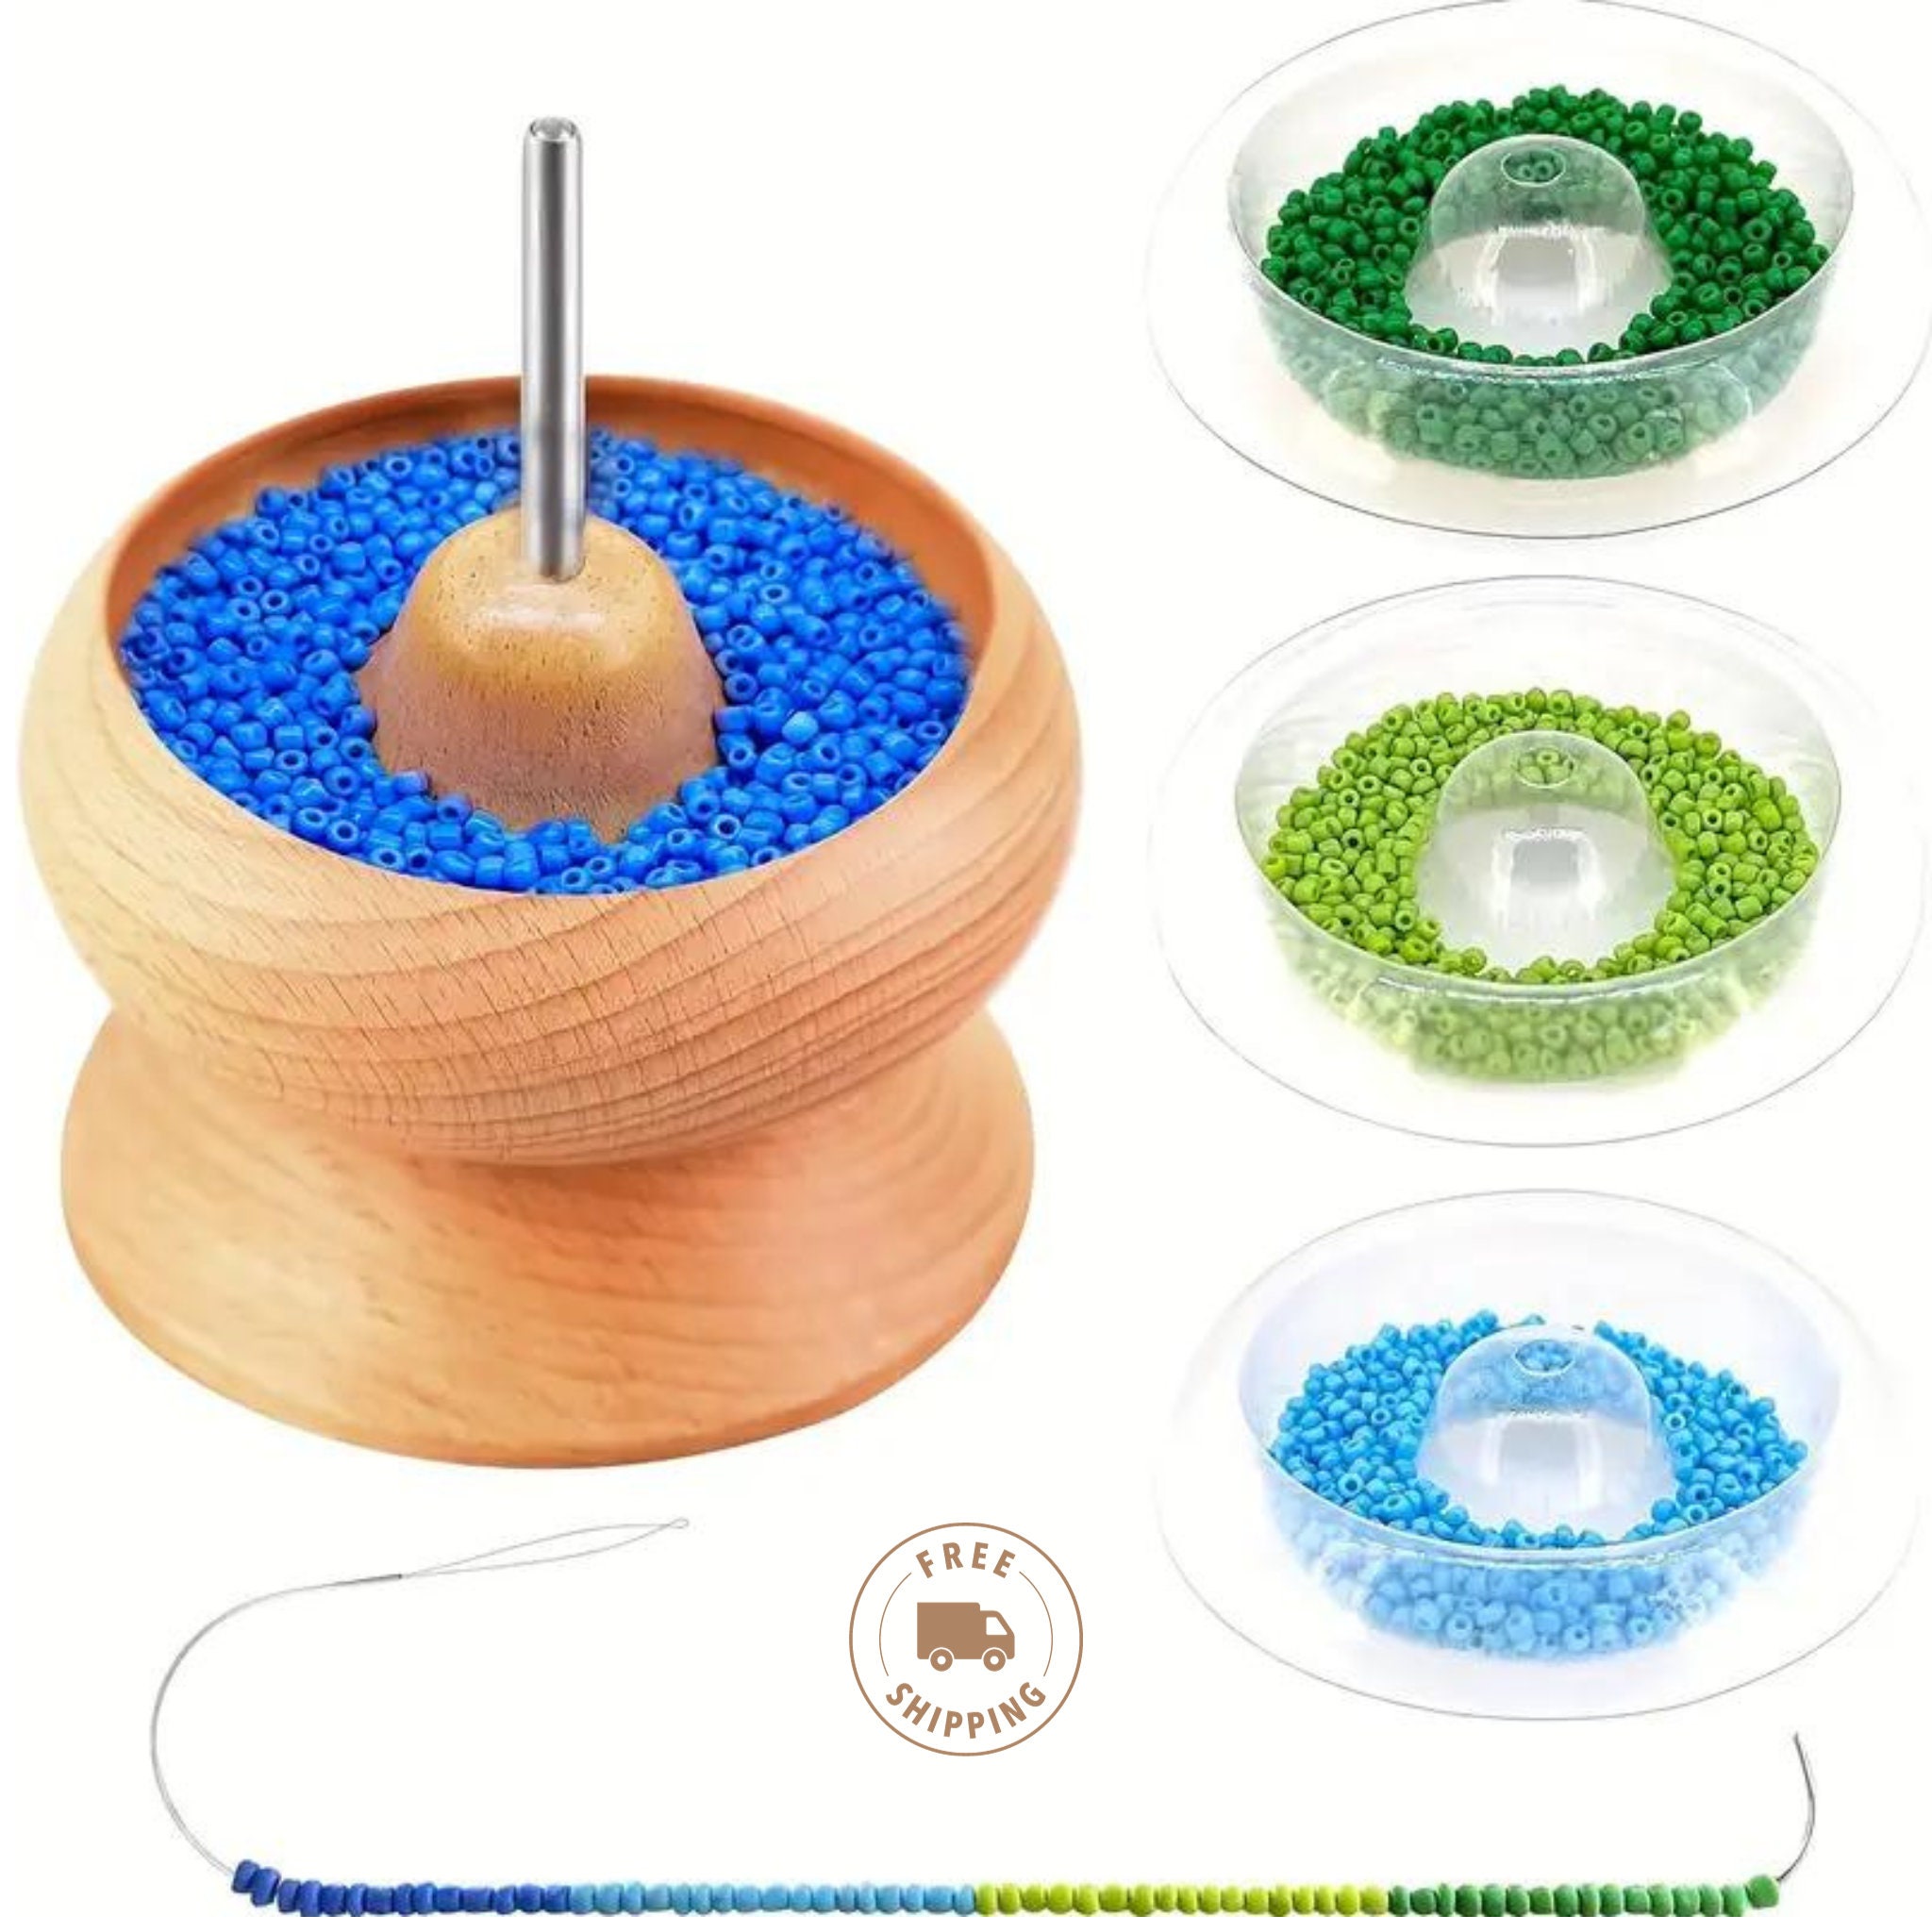 Seed Bead Spinner Needles Various Styles & Sizes. 